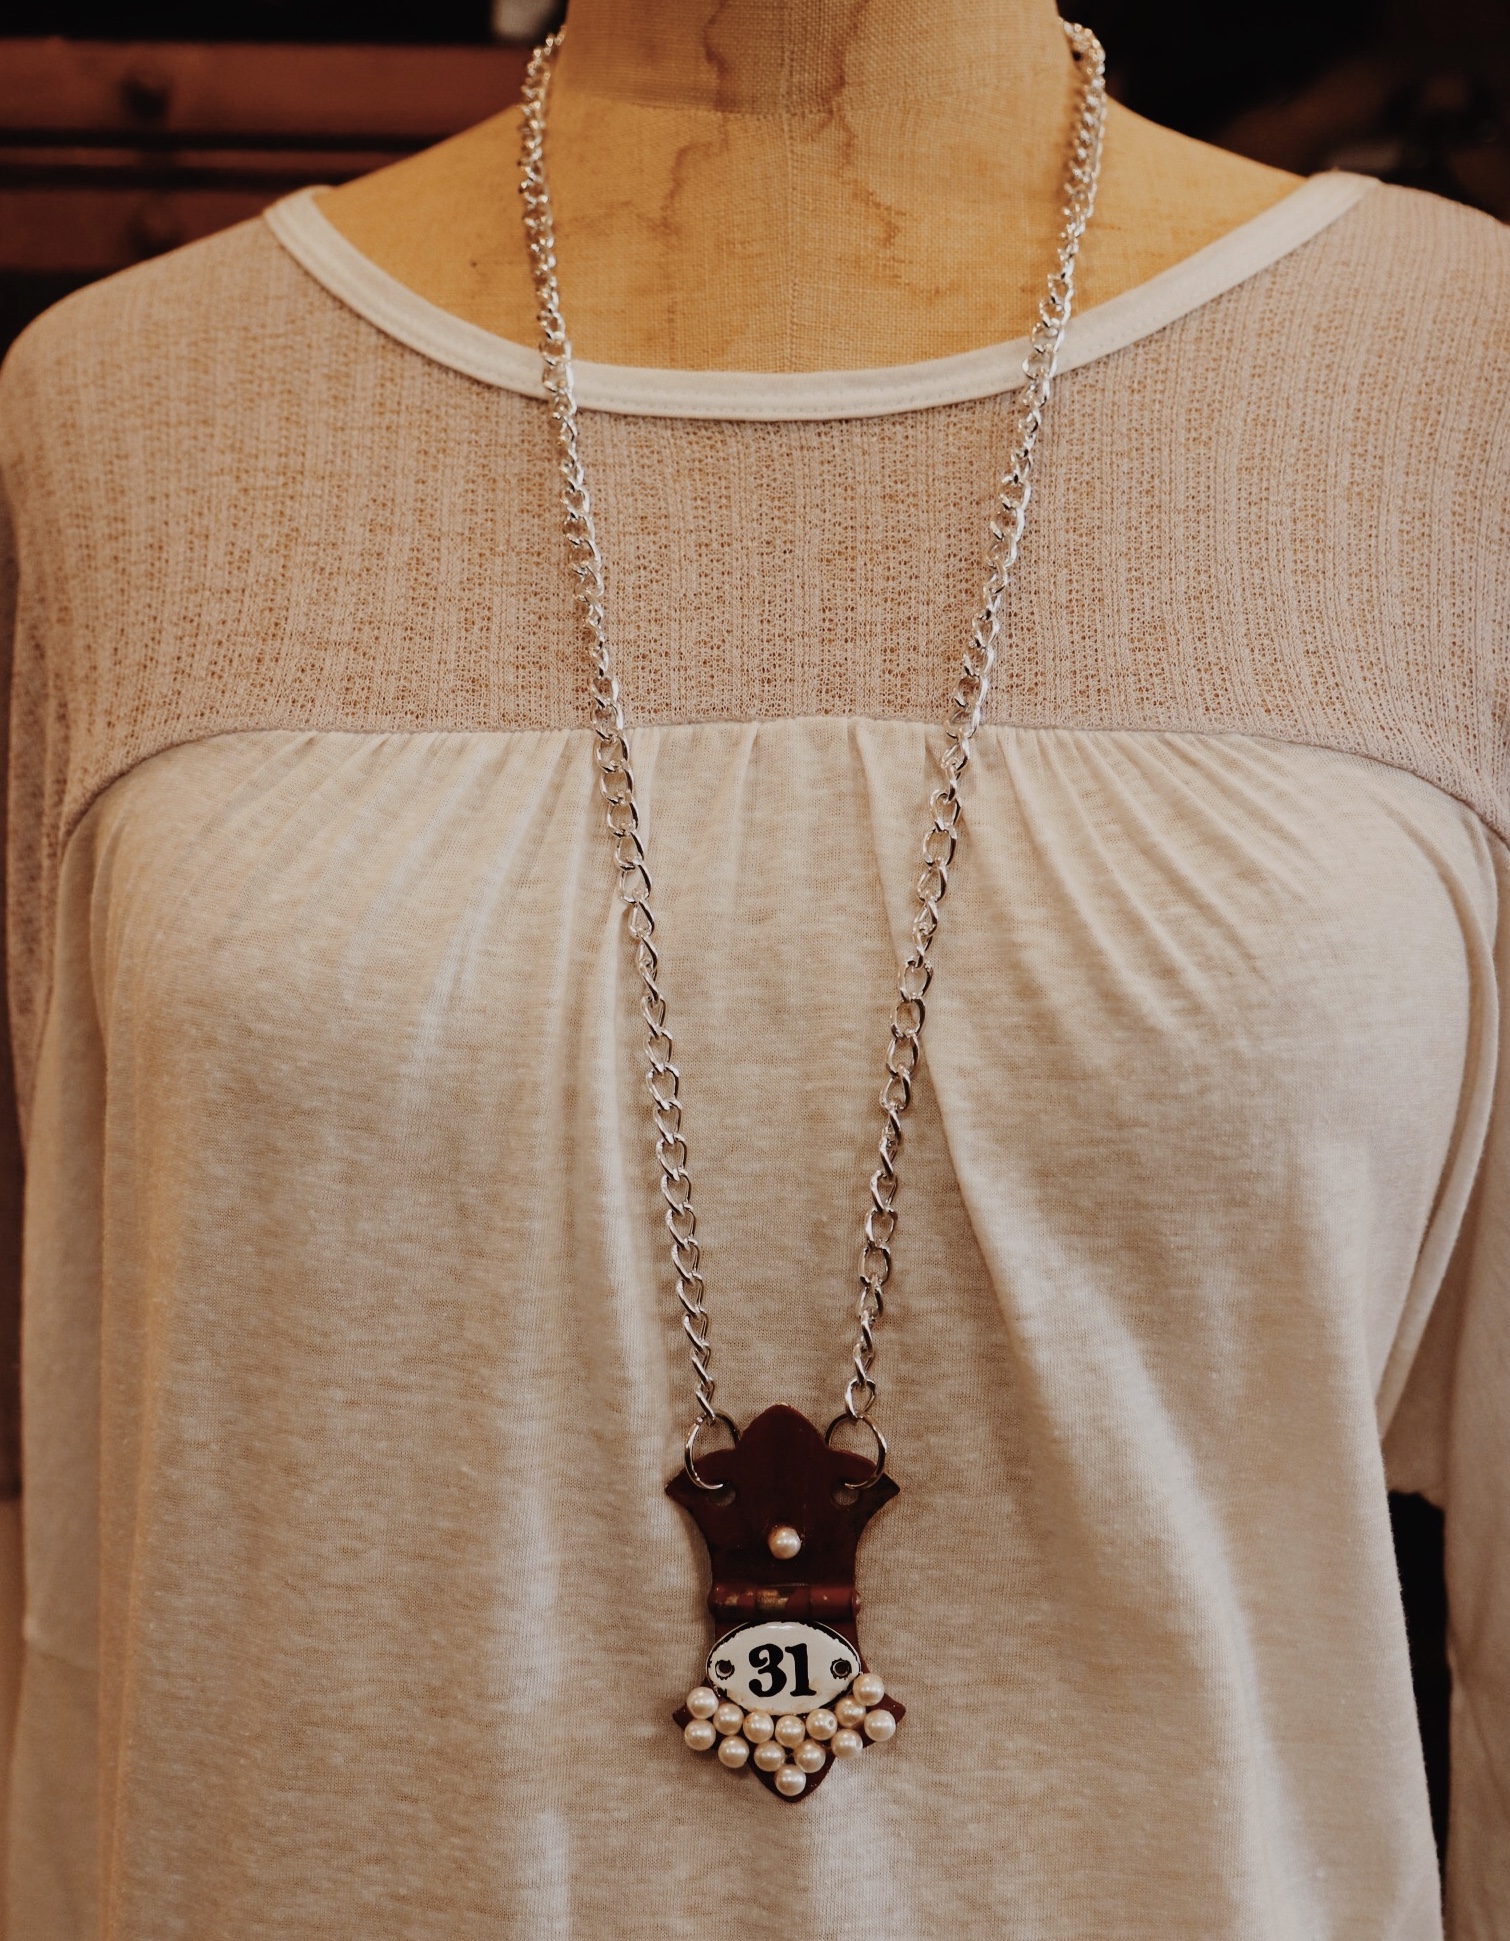 This adorable, handmade necklace is on a 32 inch chain!